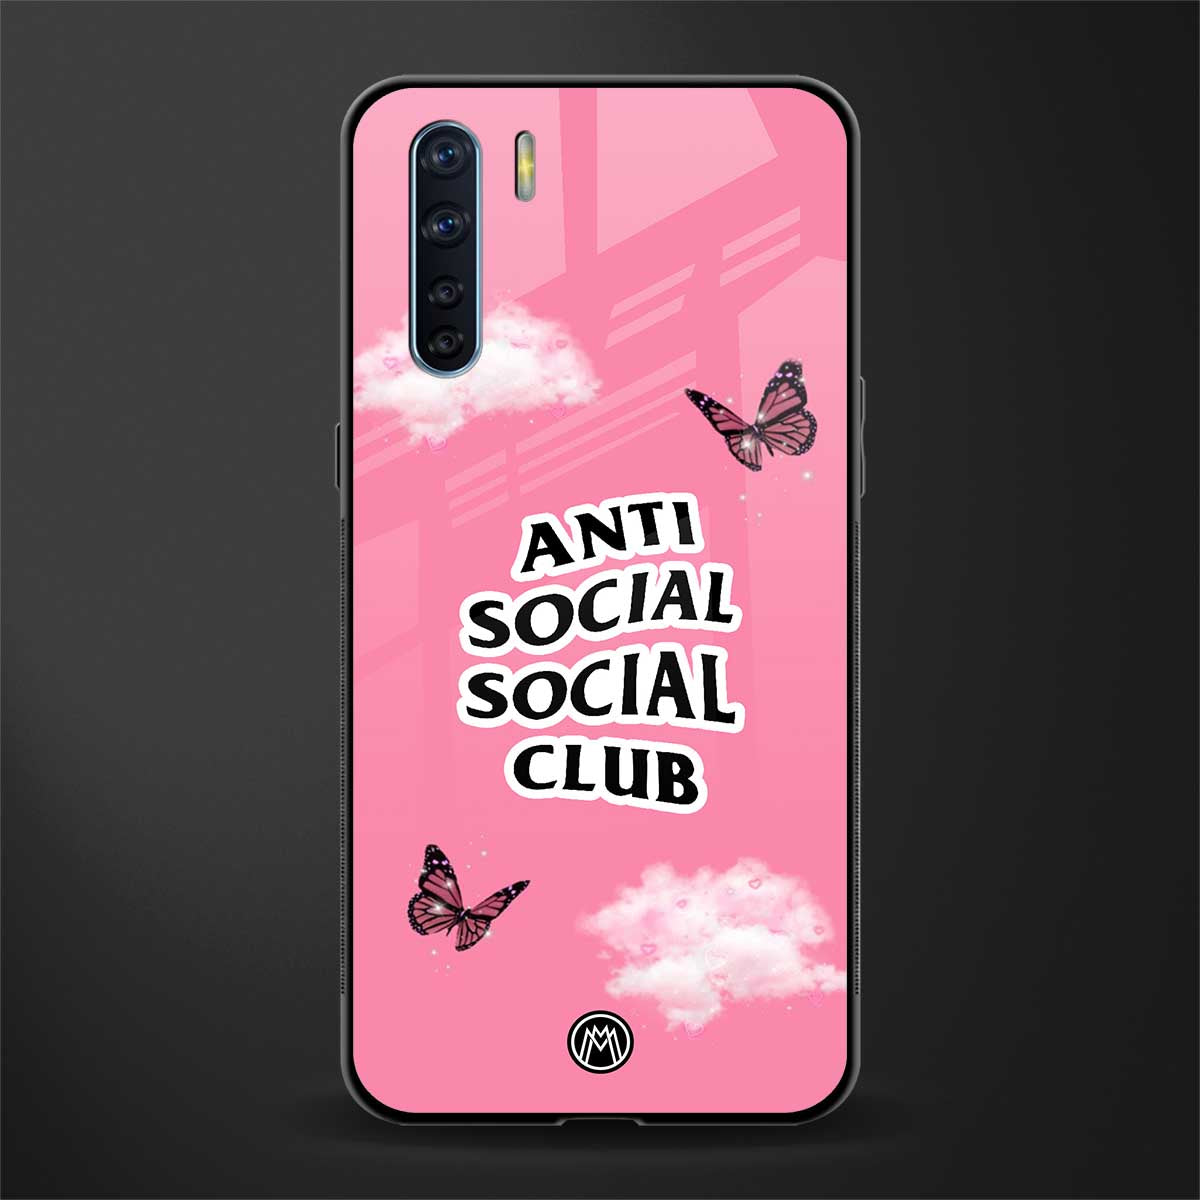 anti social social club pink edition glass case for oppo f15 image